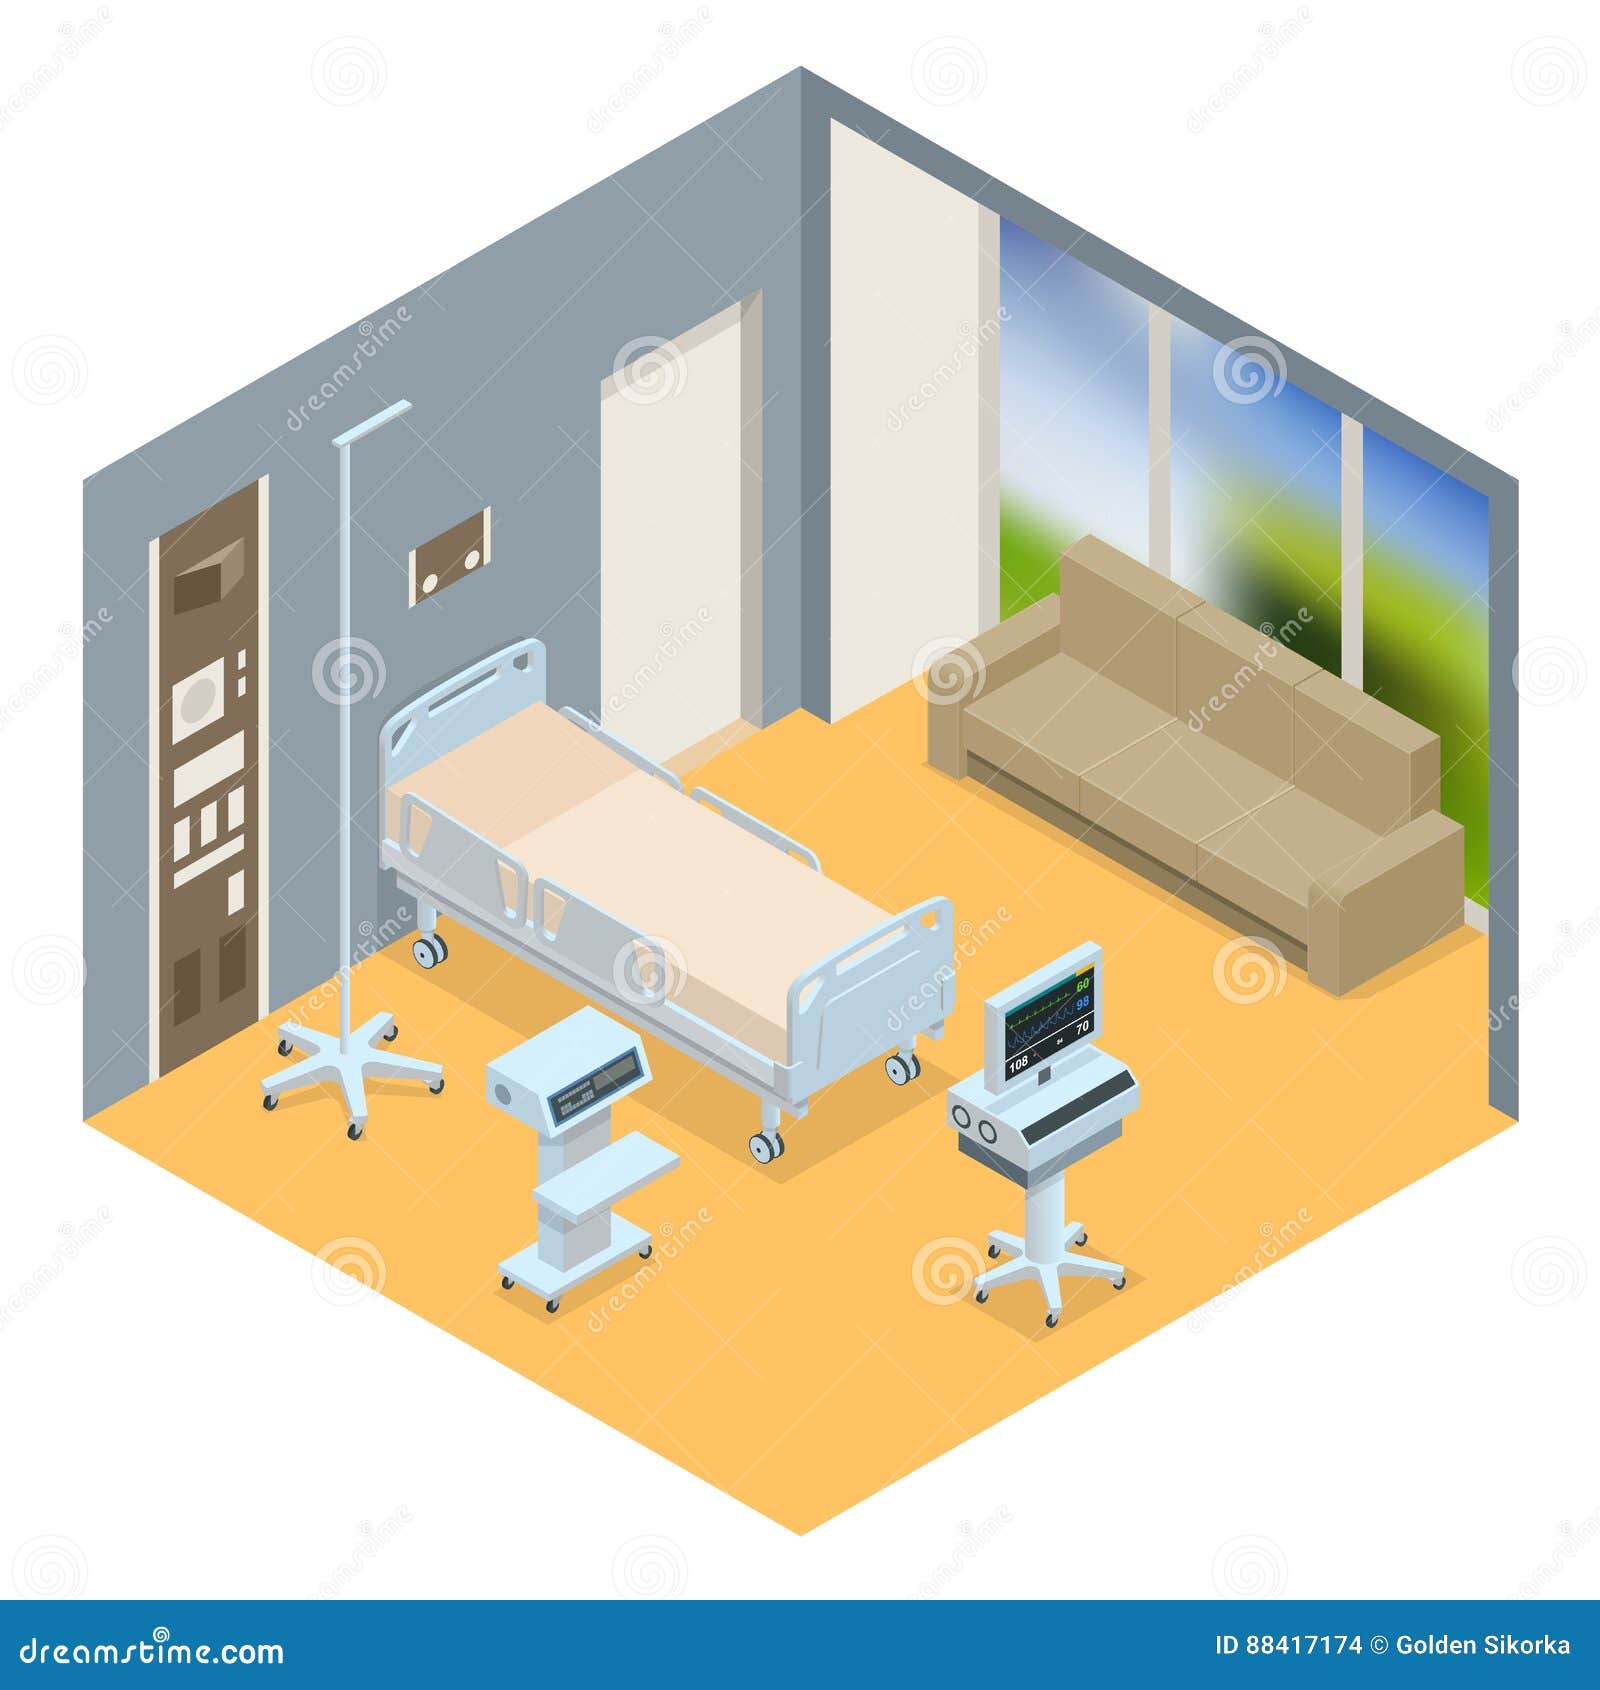 Hospital Ward Intensive Care Unit Graphic Stock Vector (Royalty Free)  1727993782 | Shutterstock